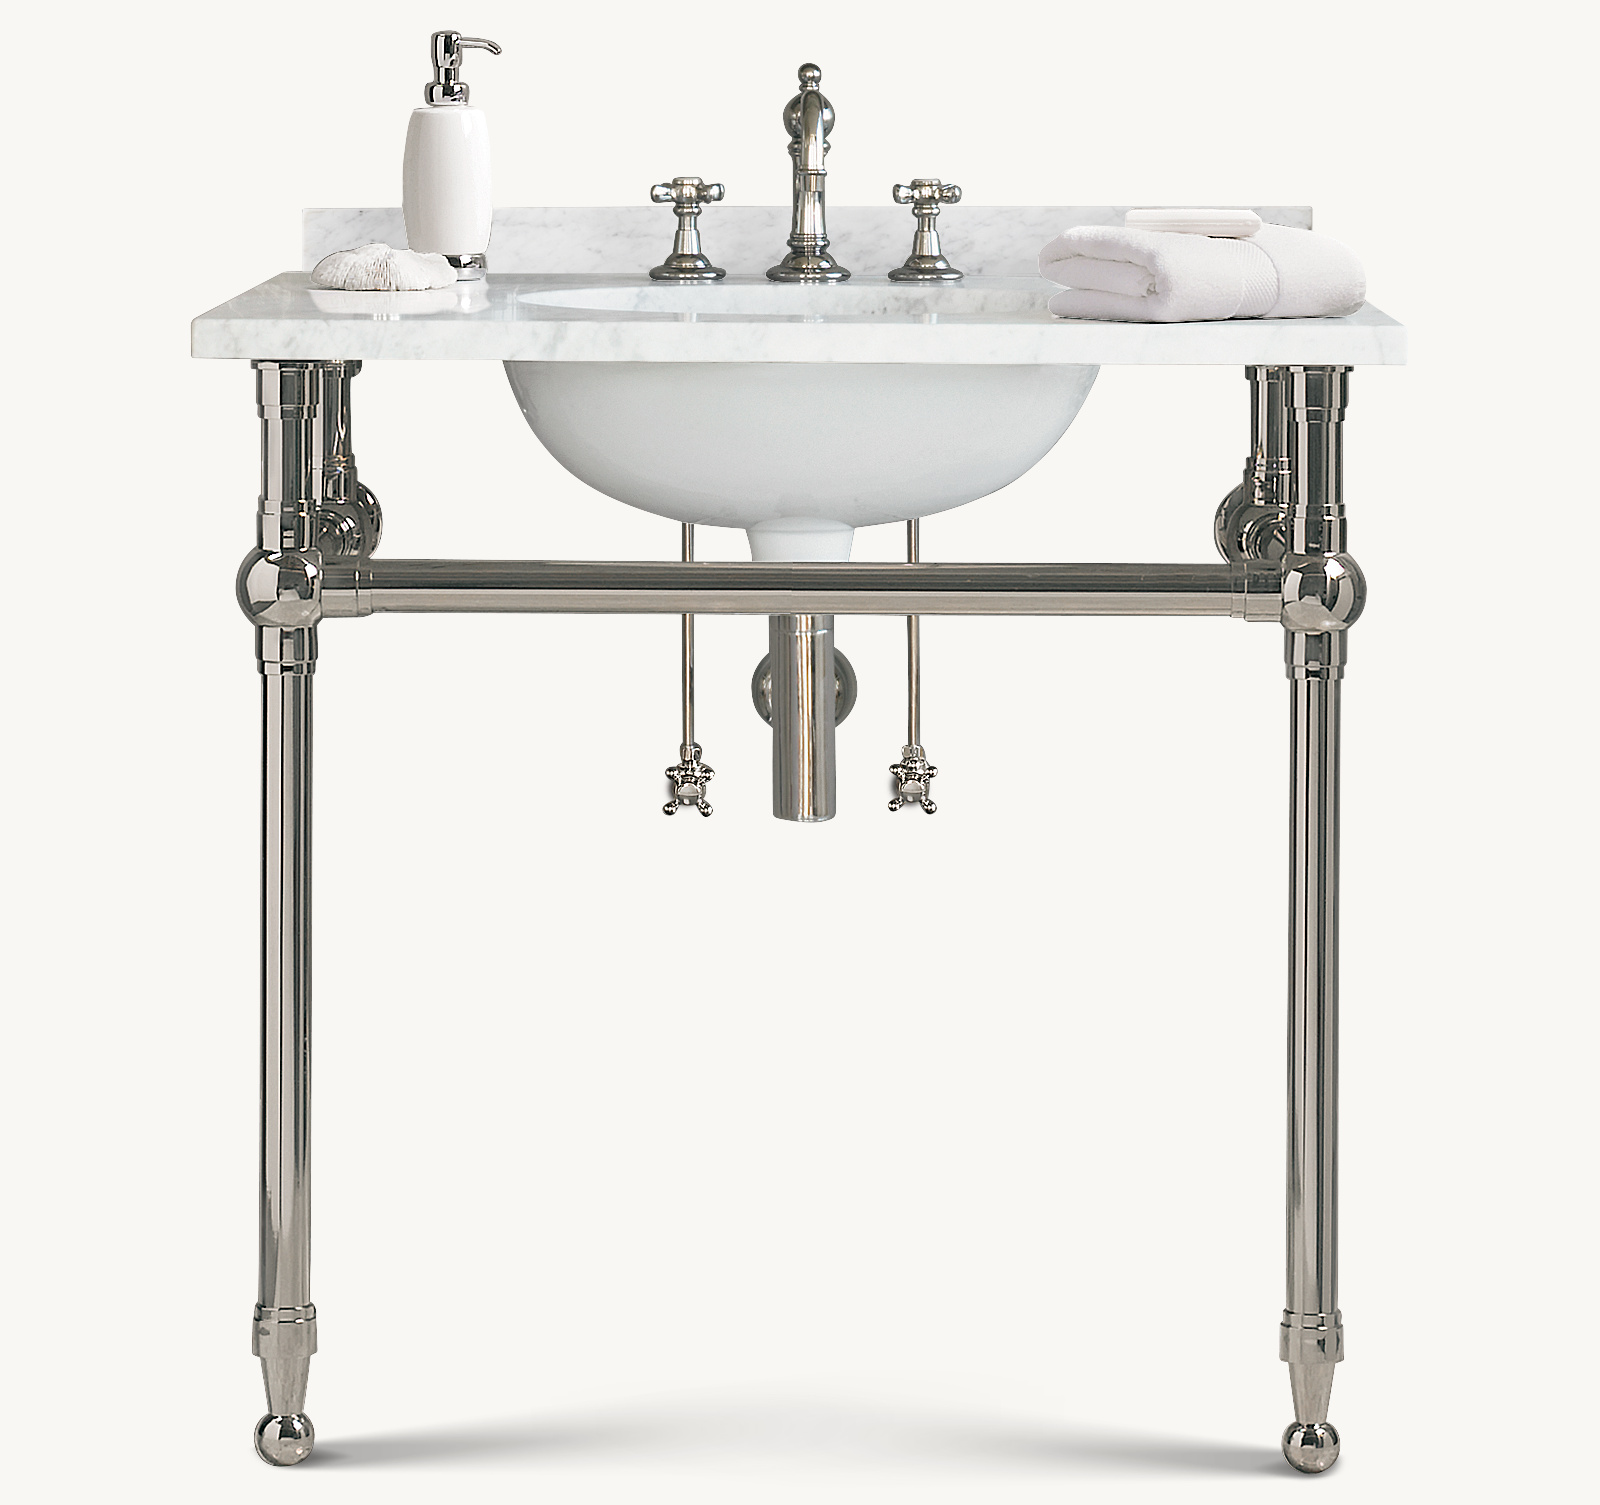 Shown in Polished Nickel with Italian Carrara Marble countertop. Featured with Vintage Cross-Handle 8" Widespread Faucet.